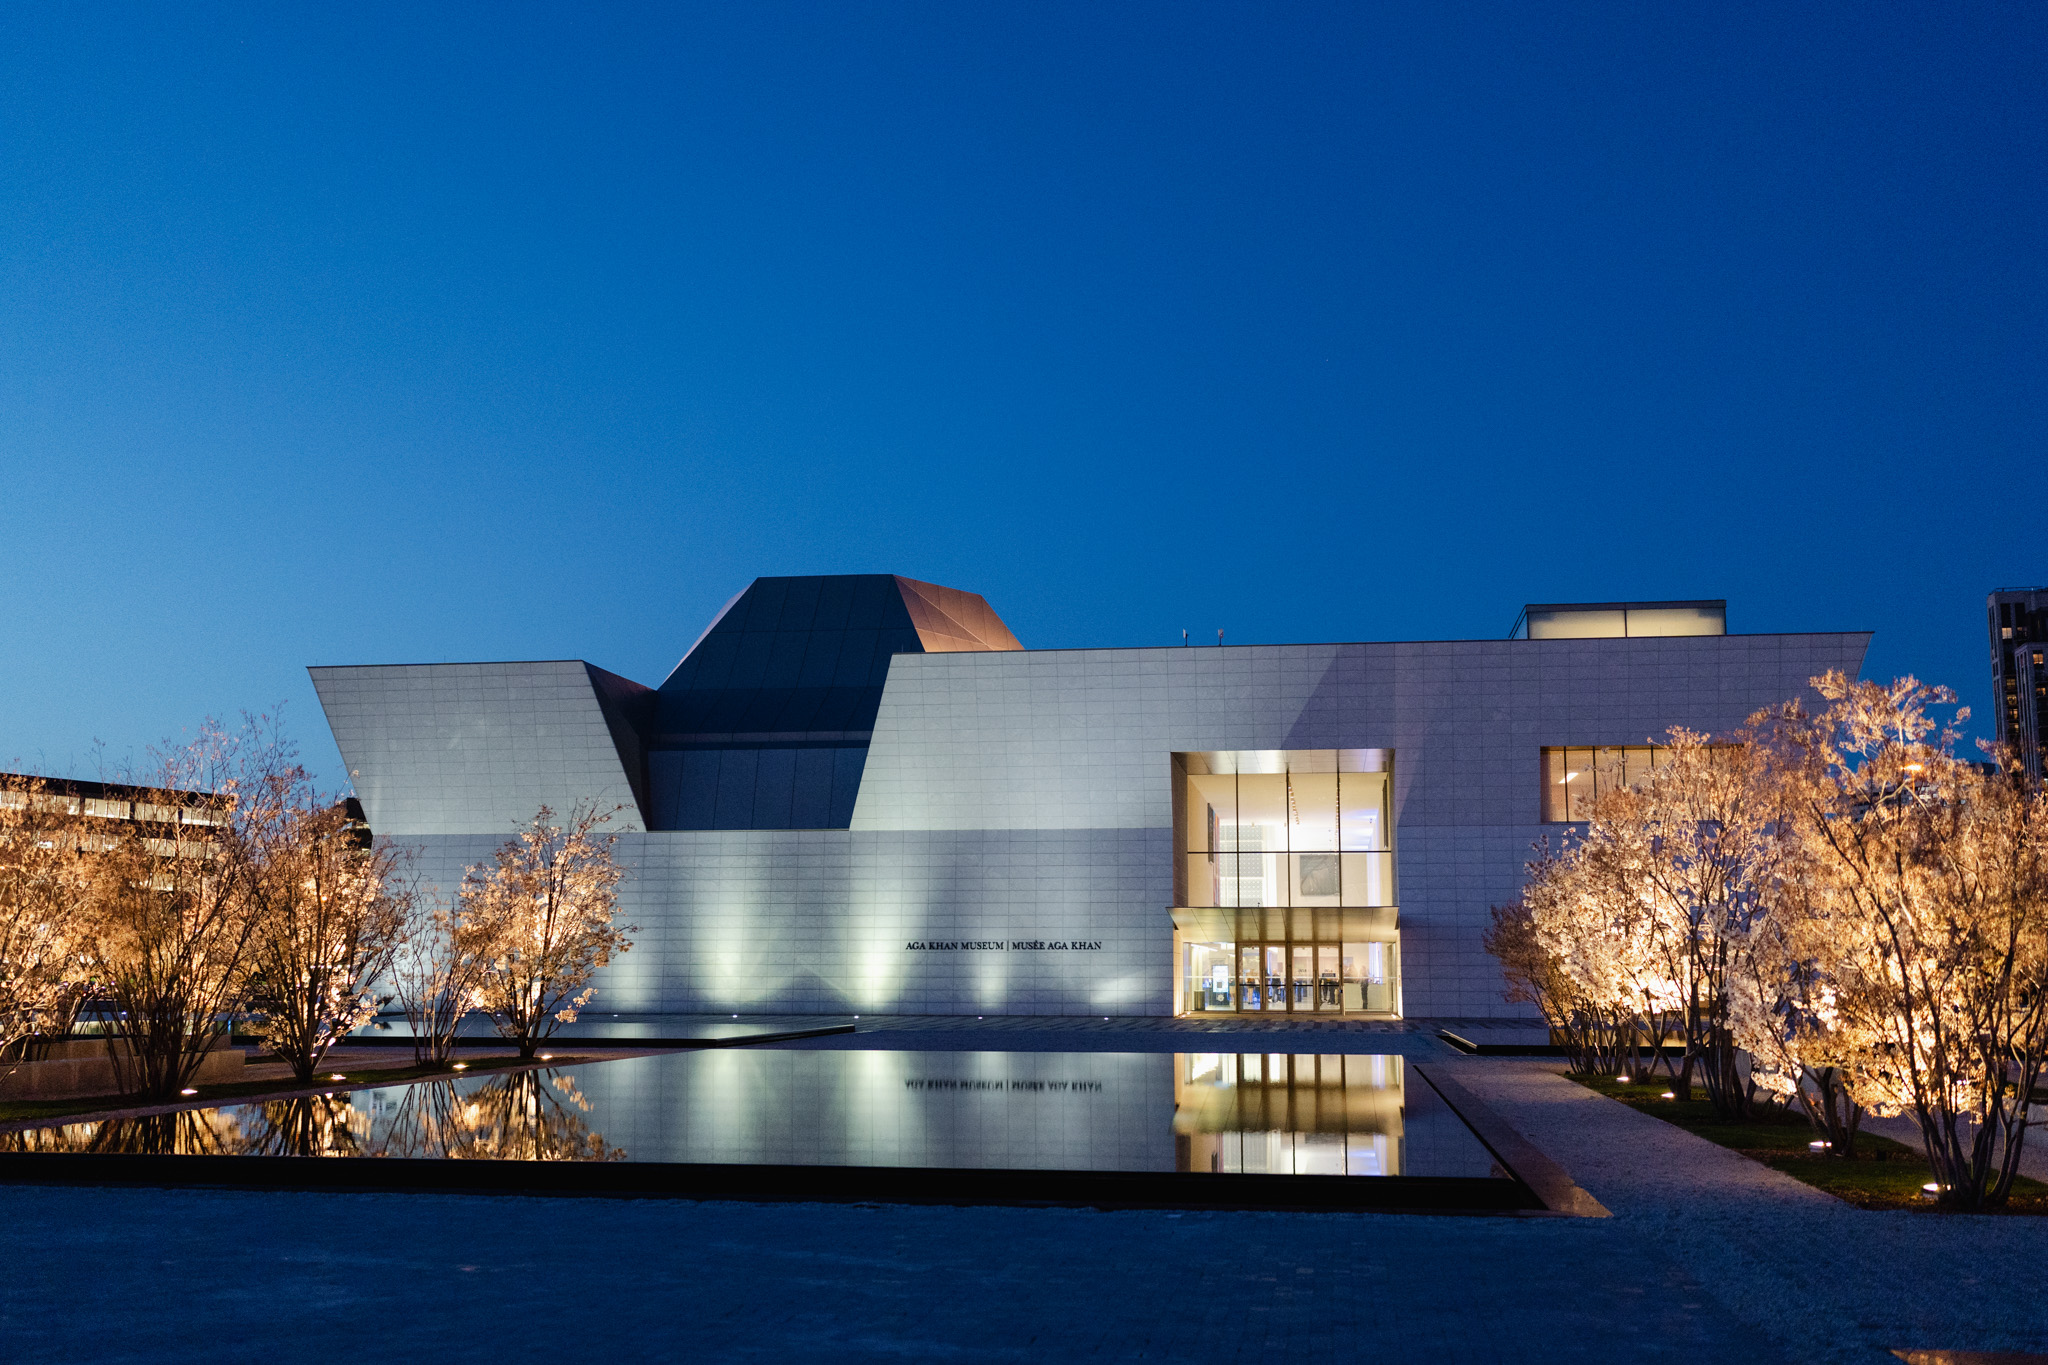 Modern building with a geometric design, illuminated at night. Trees with white lights line the walkway, and a reflective pool is in the foreground, perfect for corporate photography sessions.